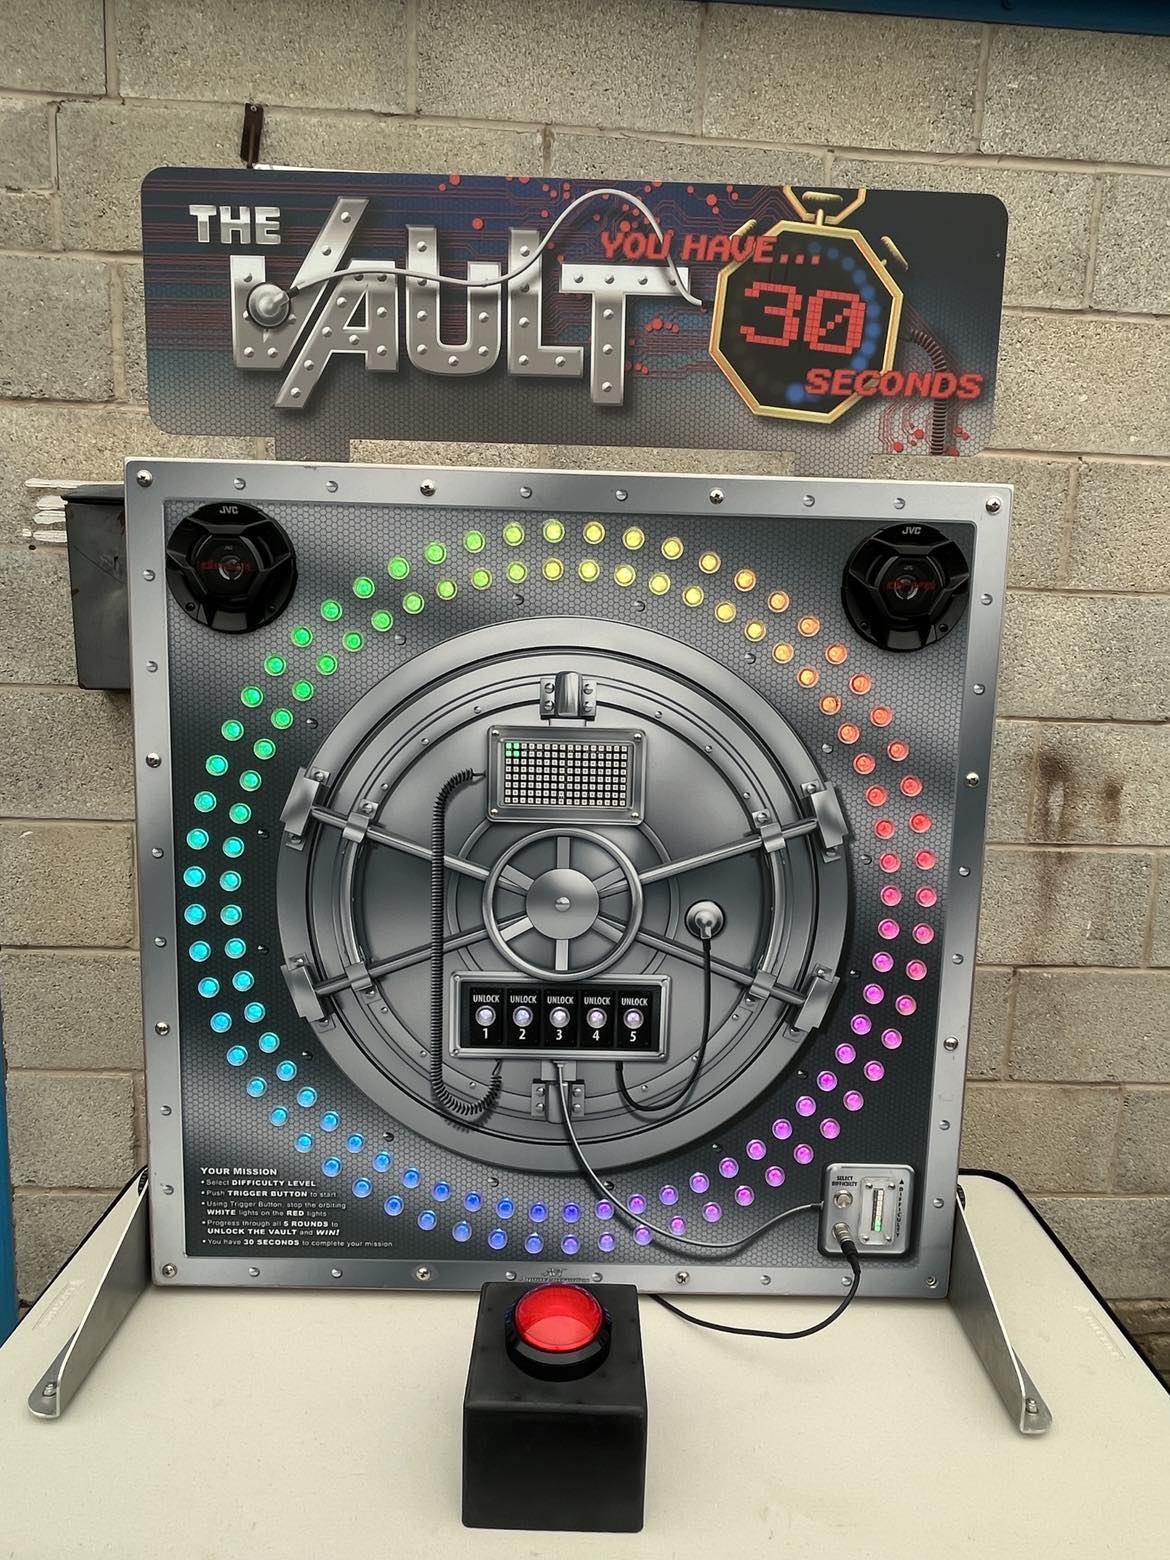 This image shows the vault electronic game available to hire from SJ's Leisure